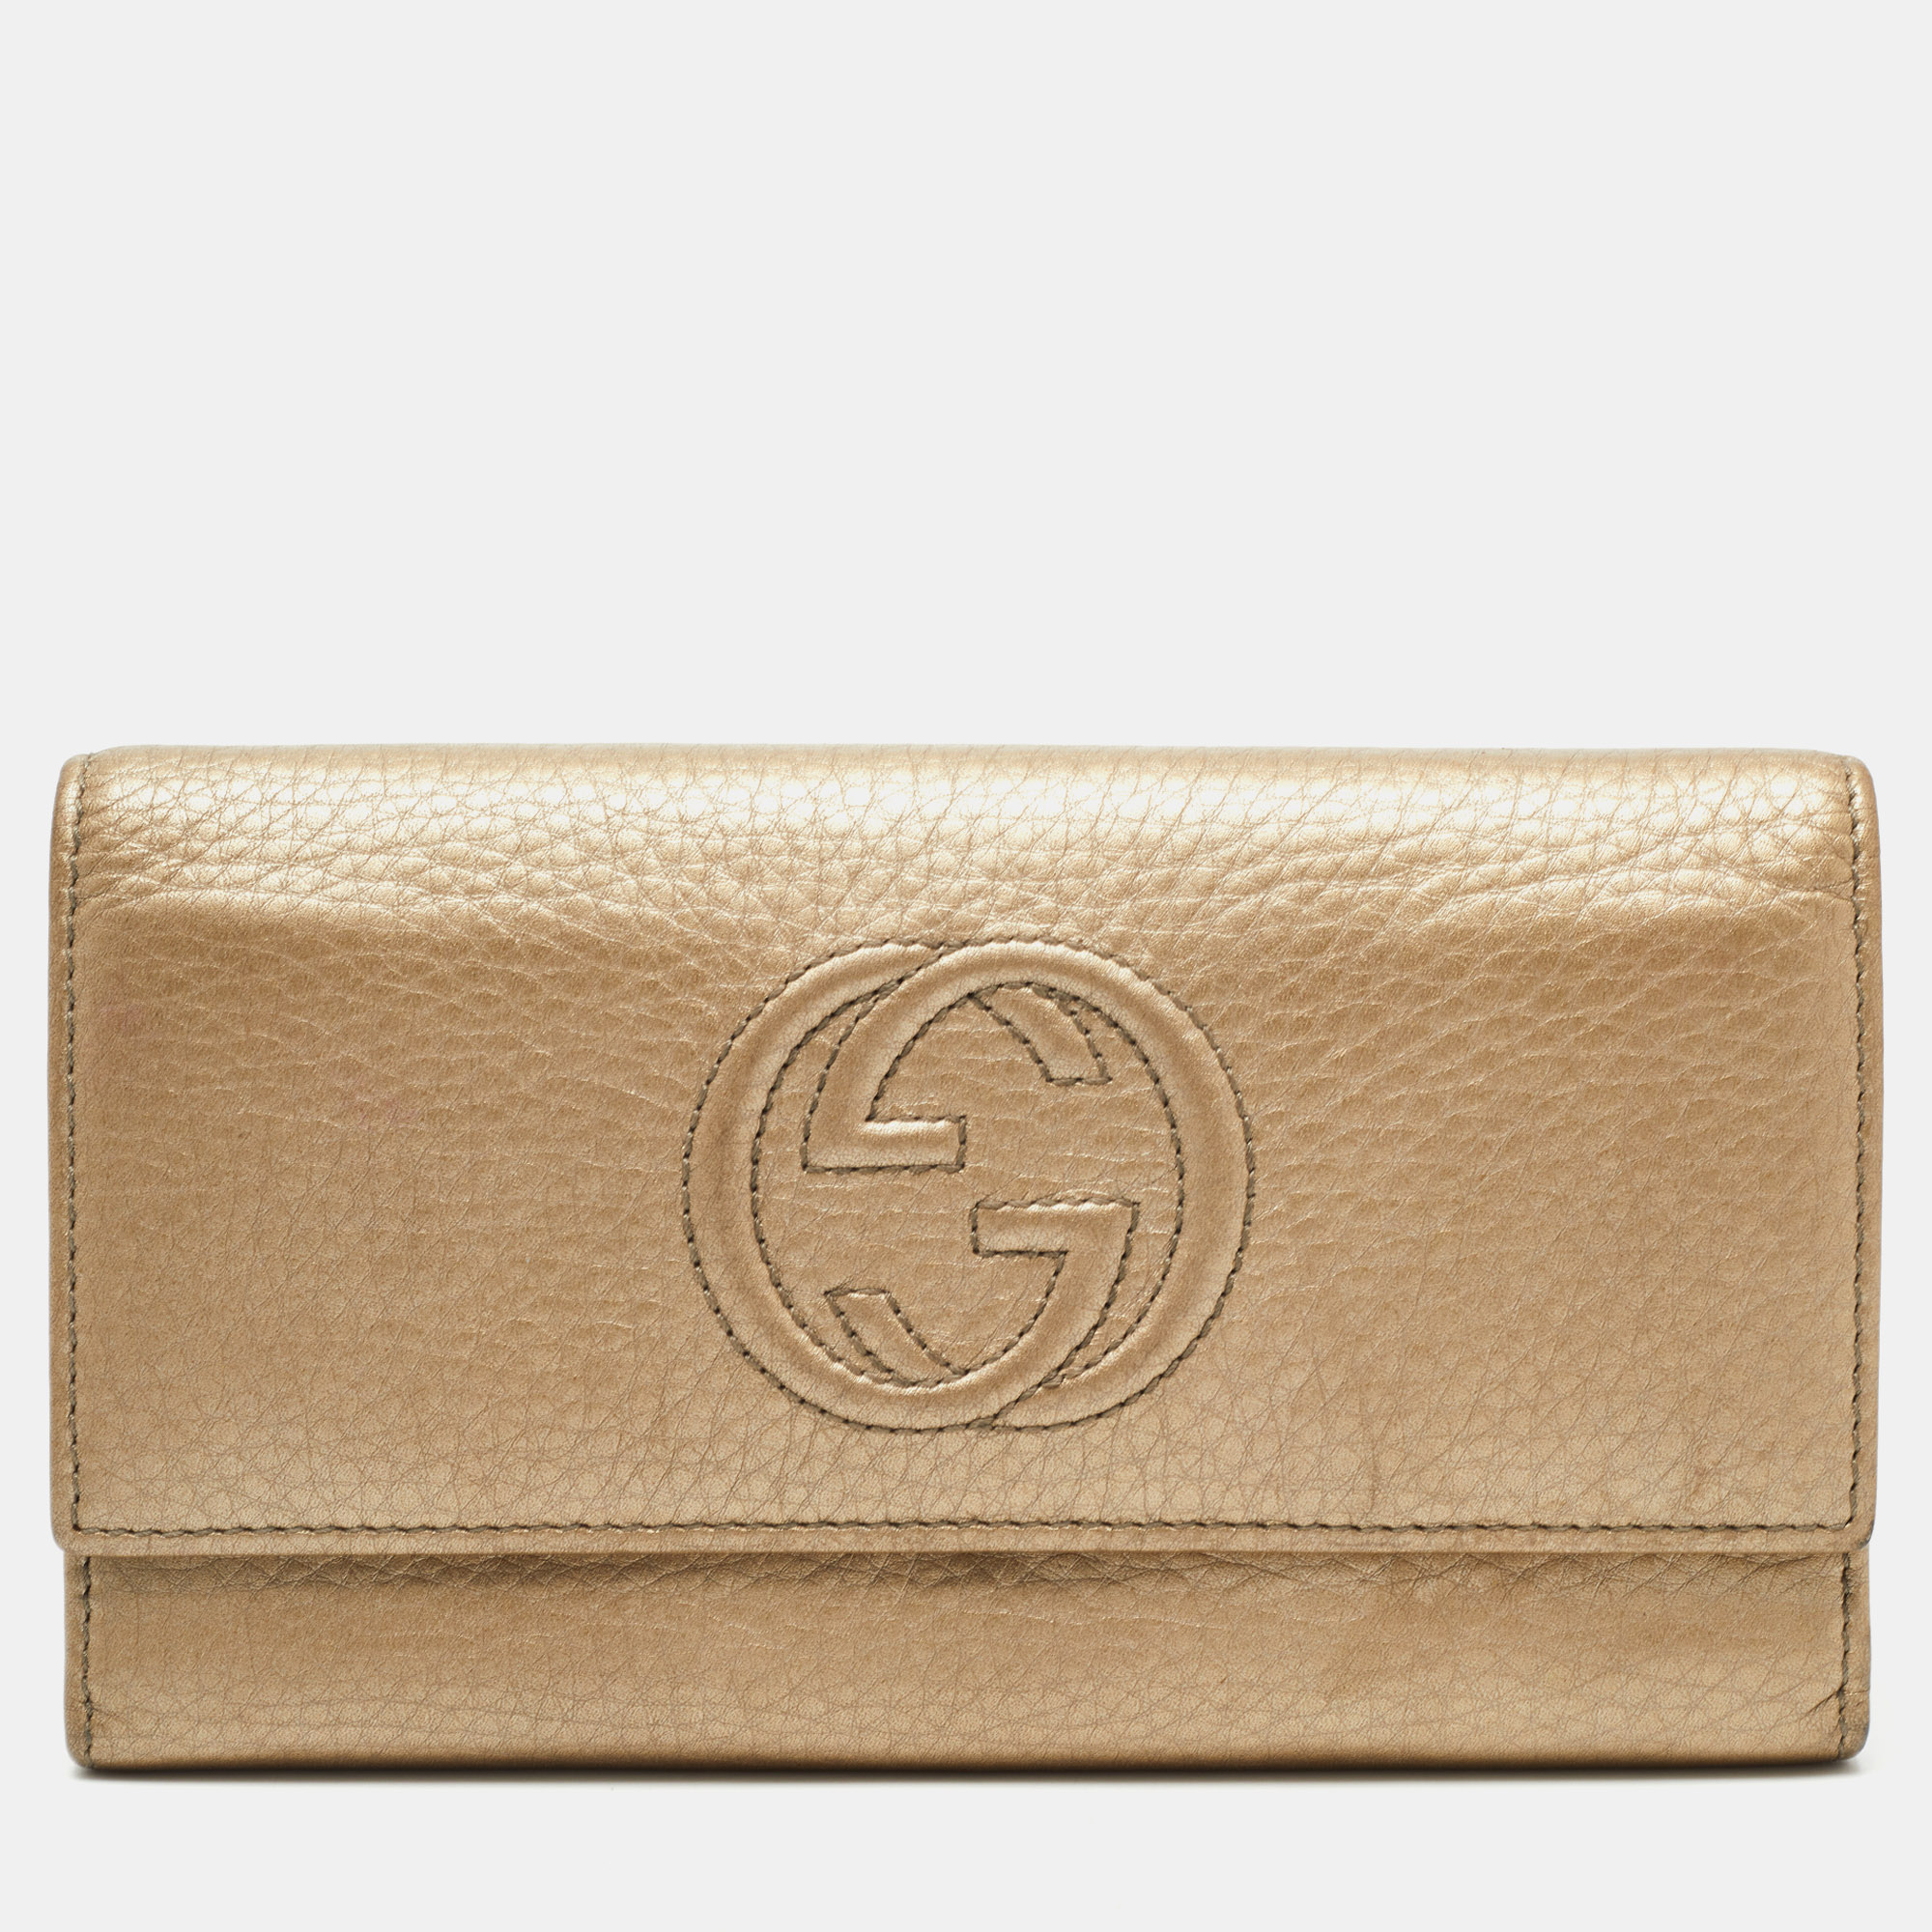 Pre-owned Gucci Metallic Beige Leather Soho Flap Continental Wallet